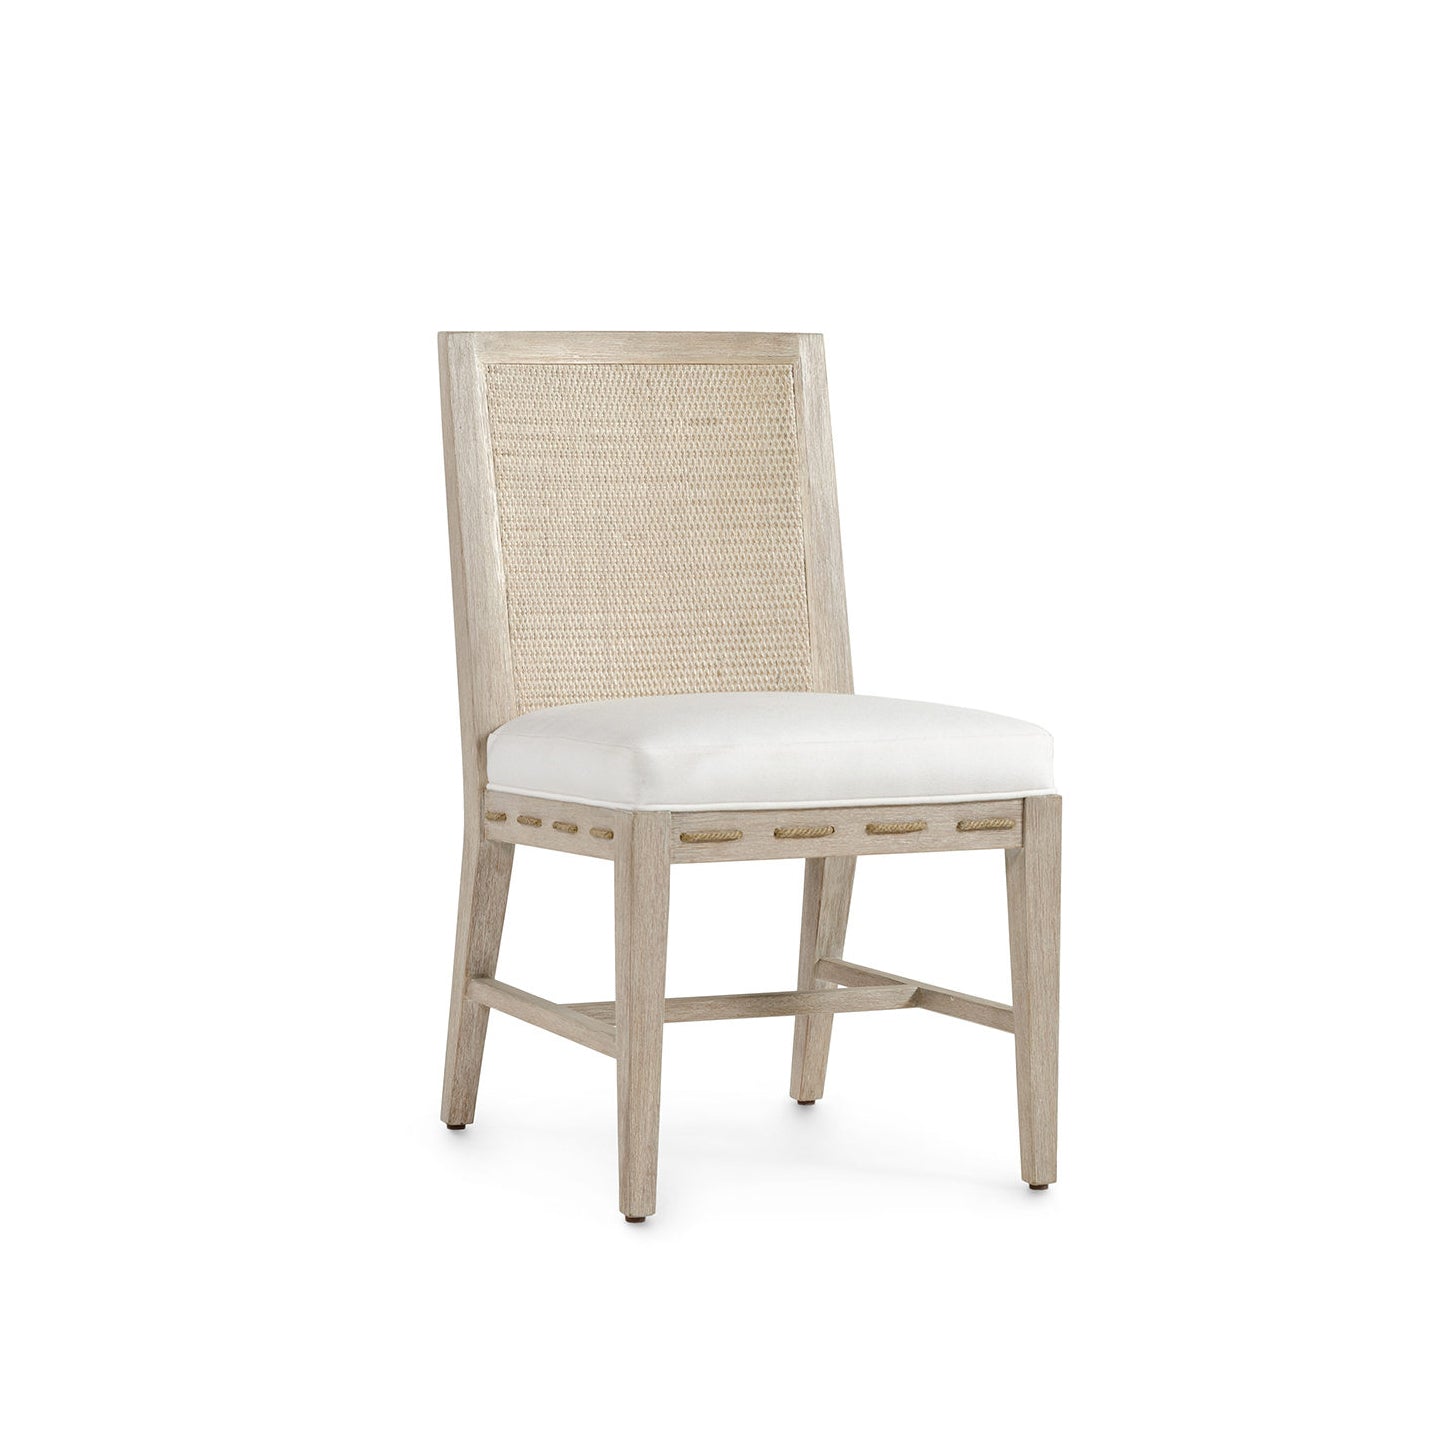 Brentwood Side Chair